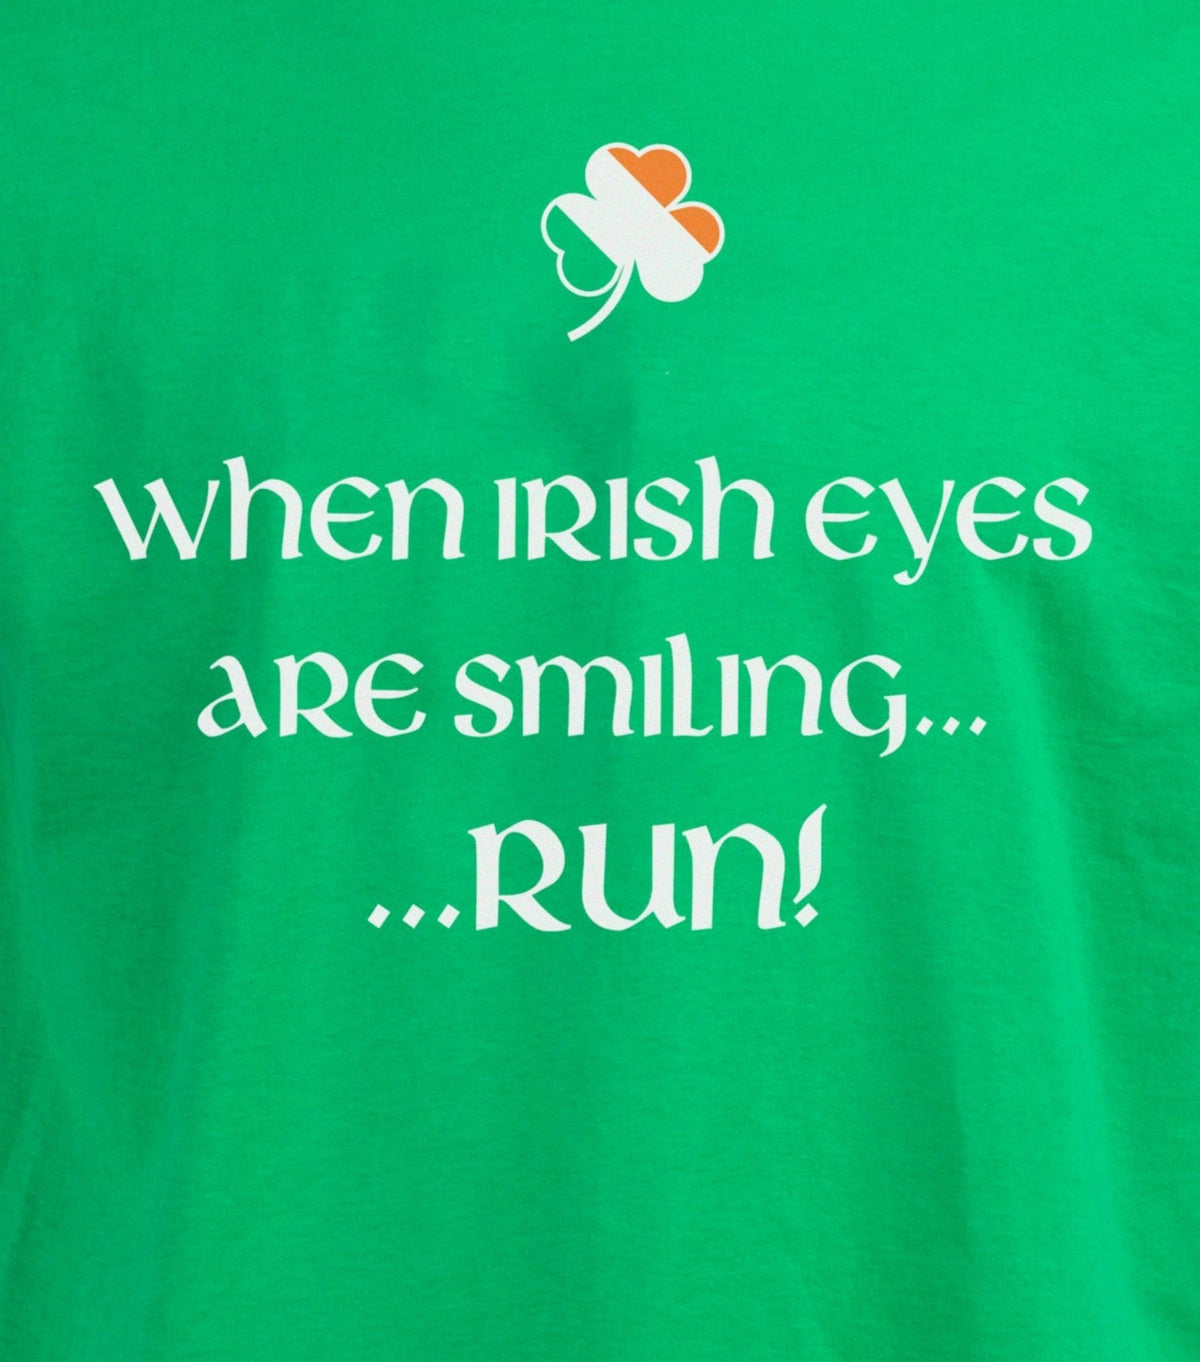 When Irish Eyes Are Smiling, Run! - St. Patrick's Day Funny T-shirt - Kid's/Youth